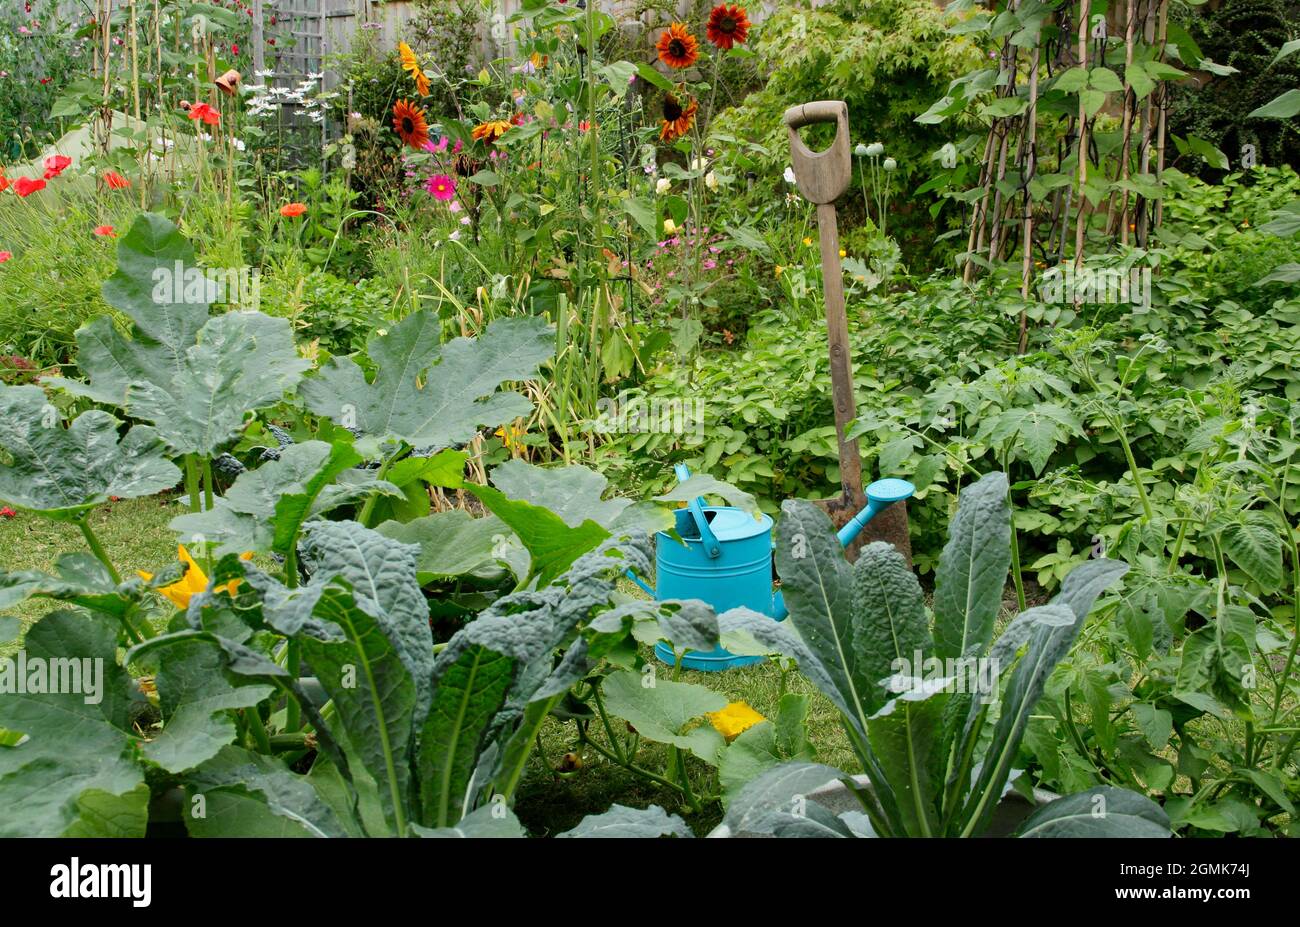 A domestic vegetable garden with French beans, potatoes, cavalo nero kale, garlic and more plus sweet pea, sunflower, marigold and cosmos flowers. UK Stock Photo